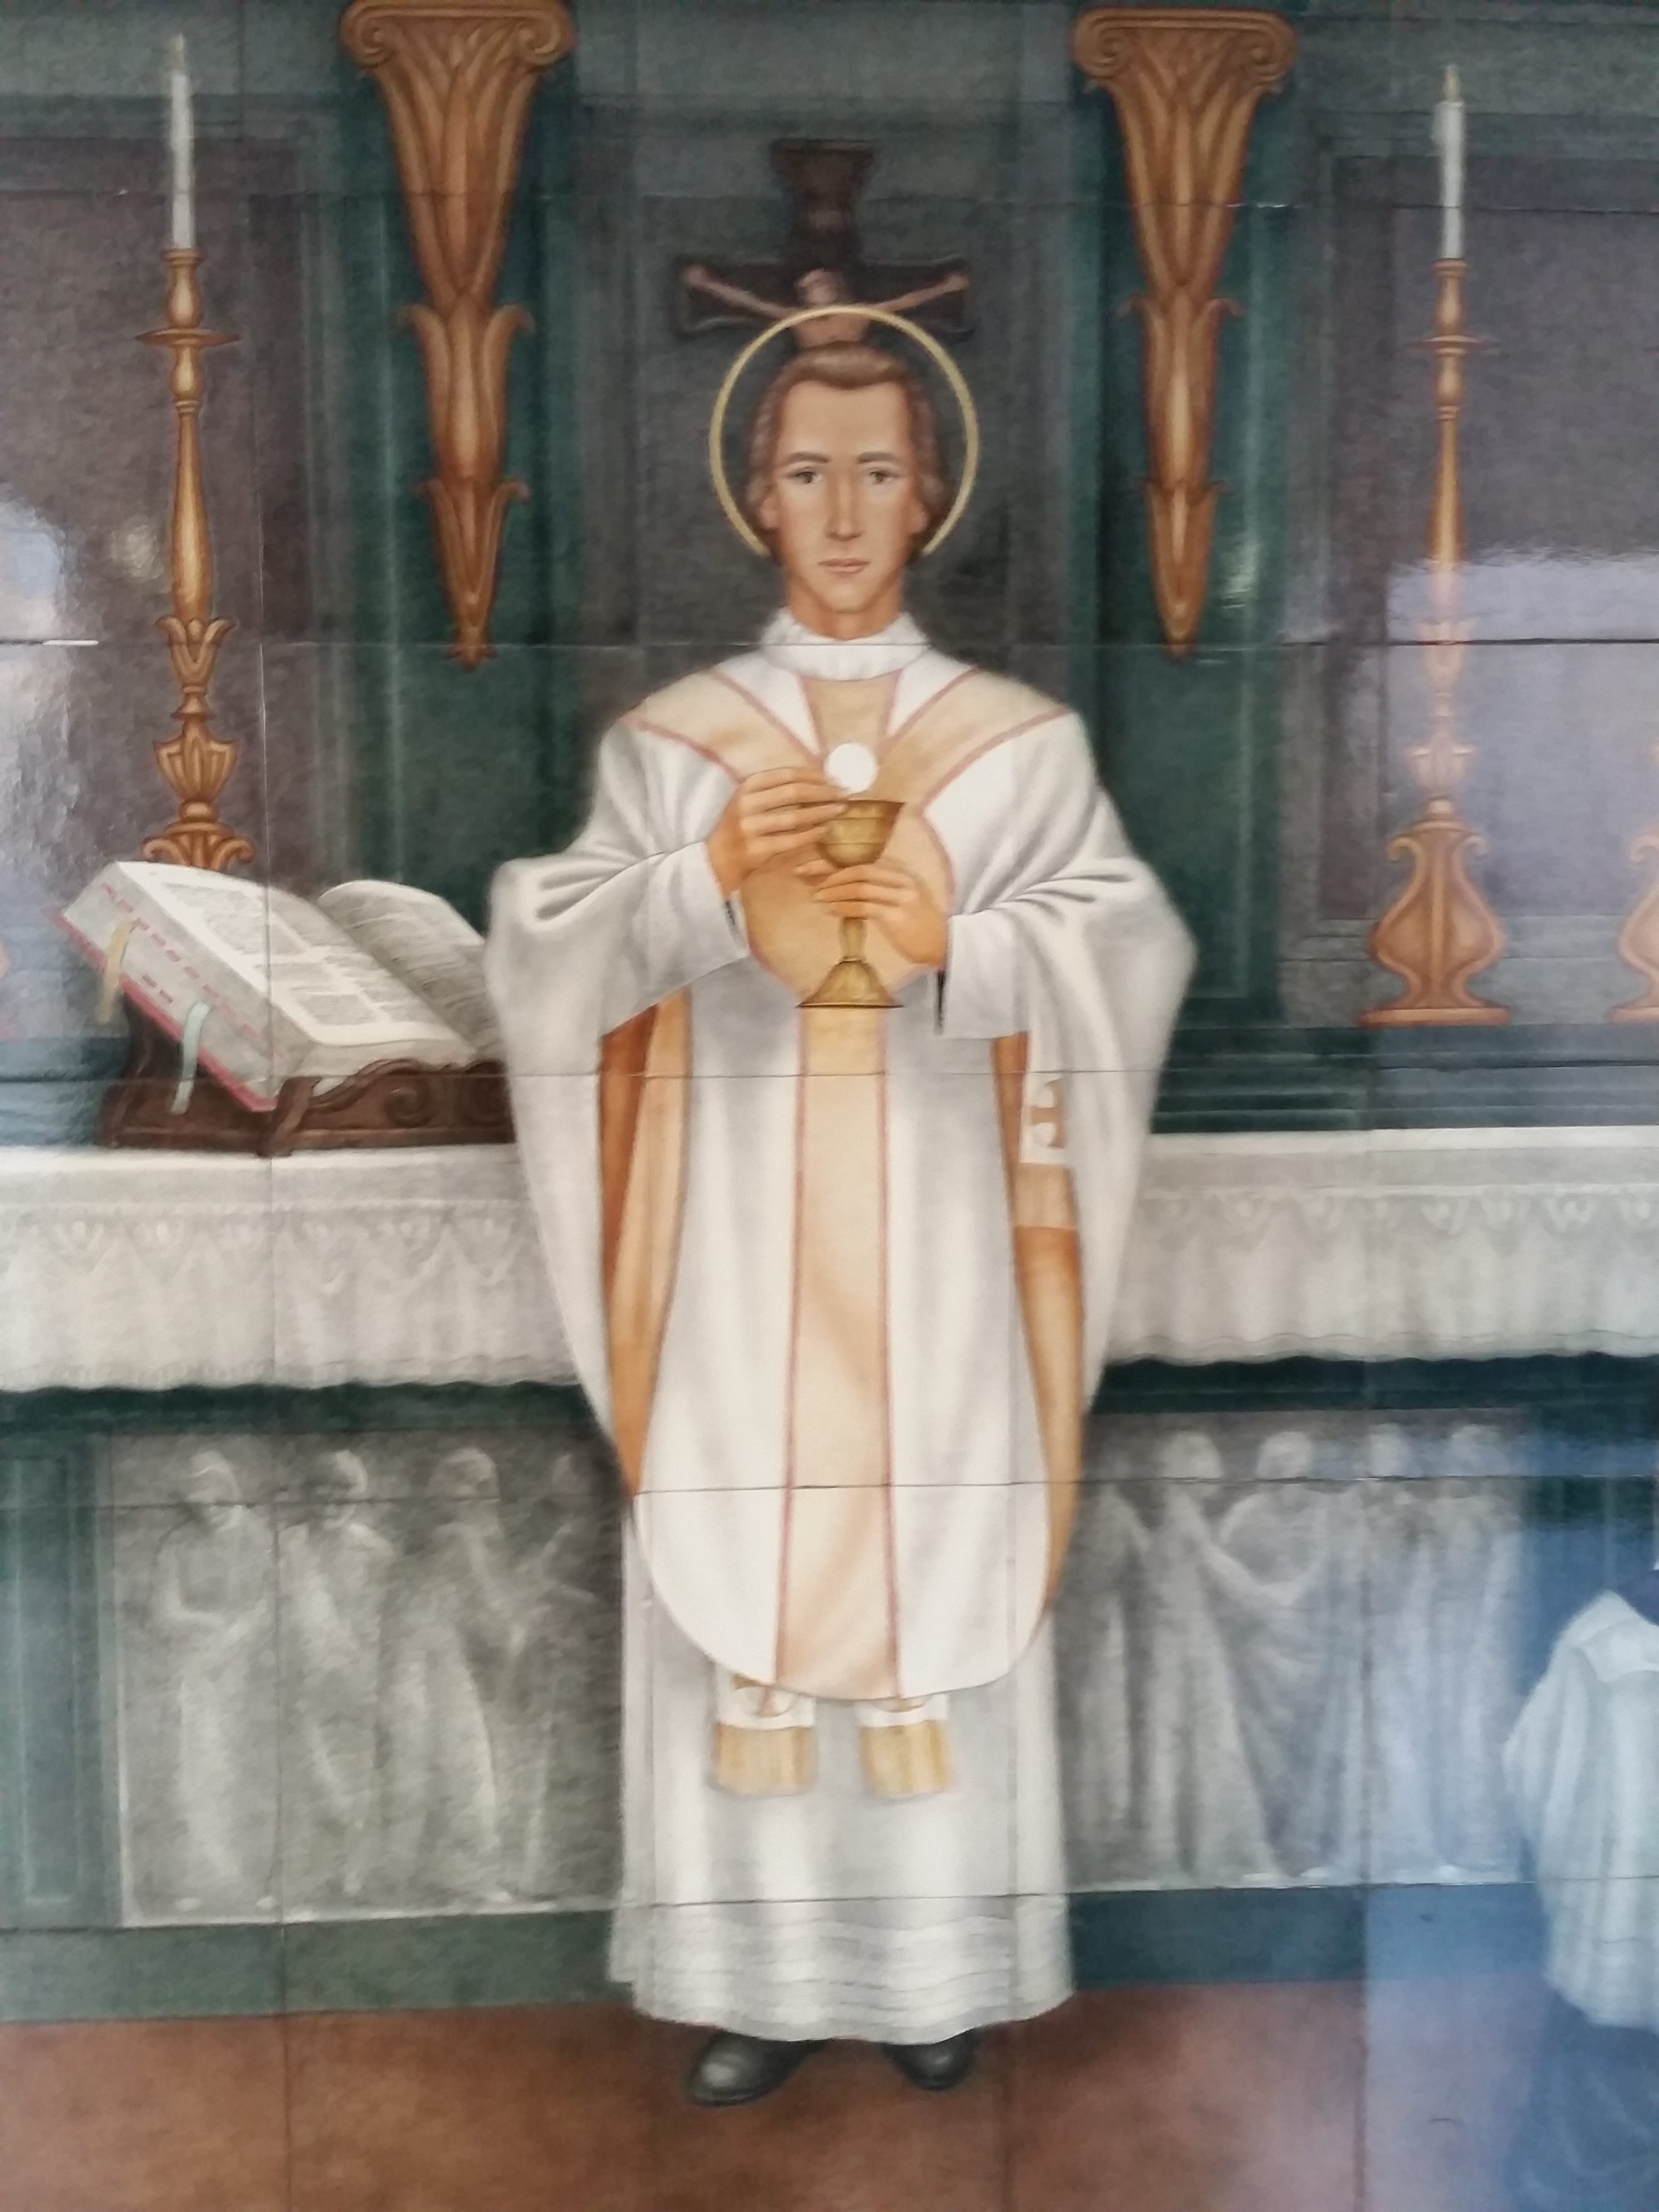 St. Pope John Paul’s II: Sunday Shows God’s Love for His Creatures